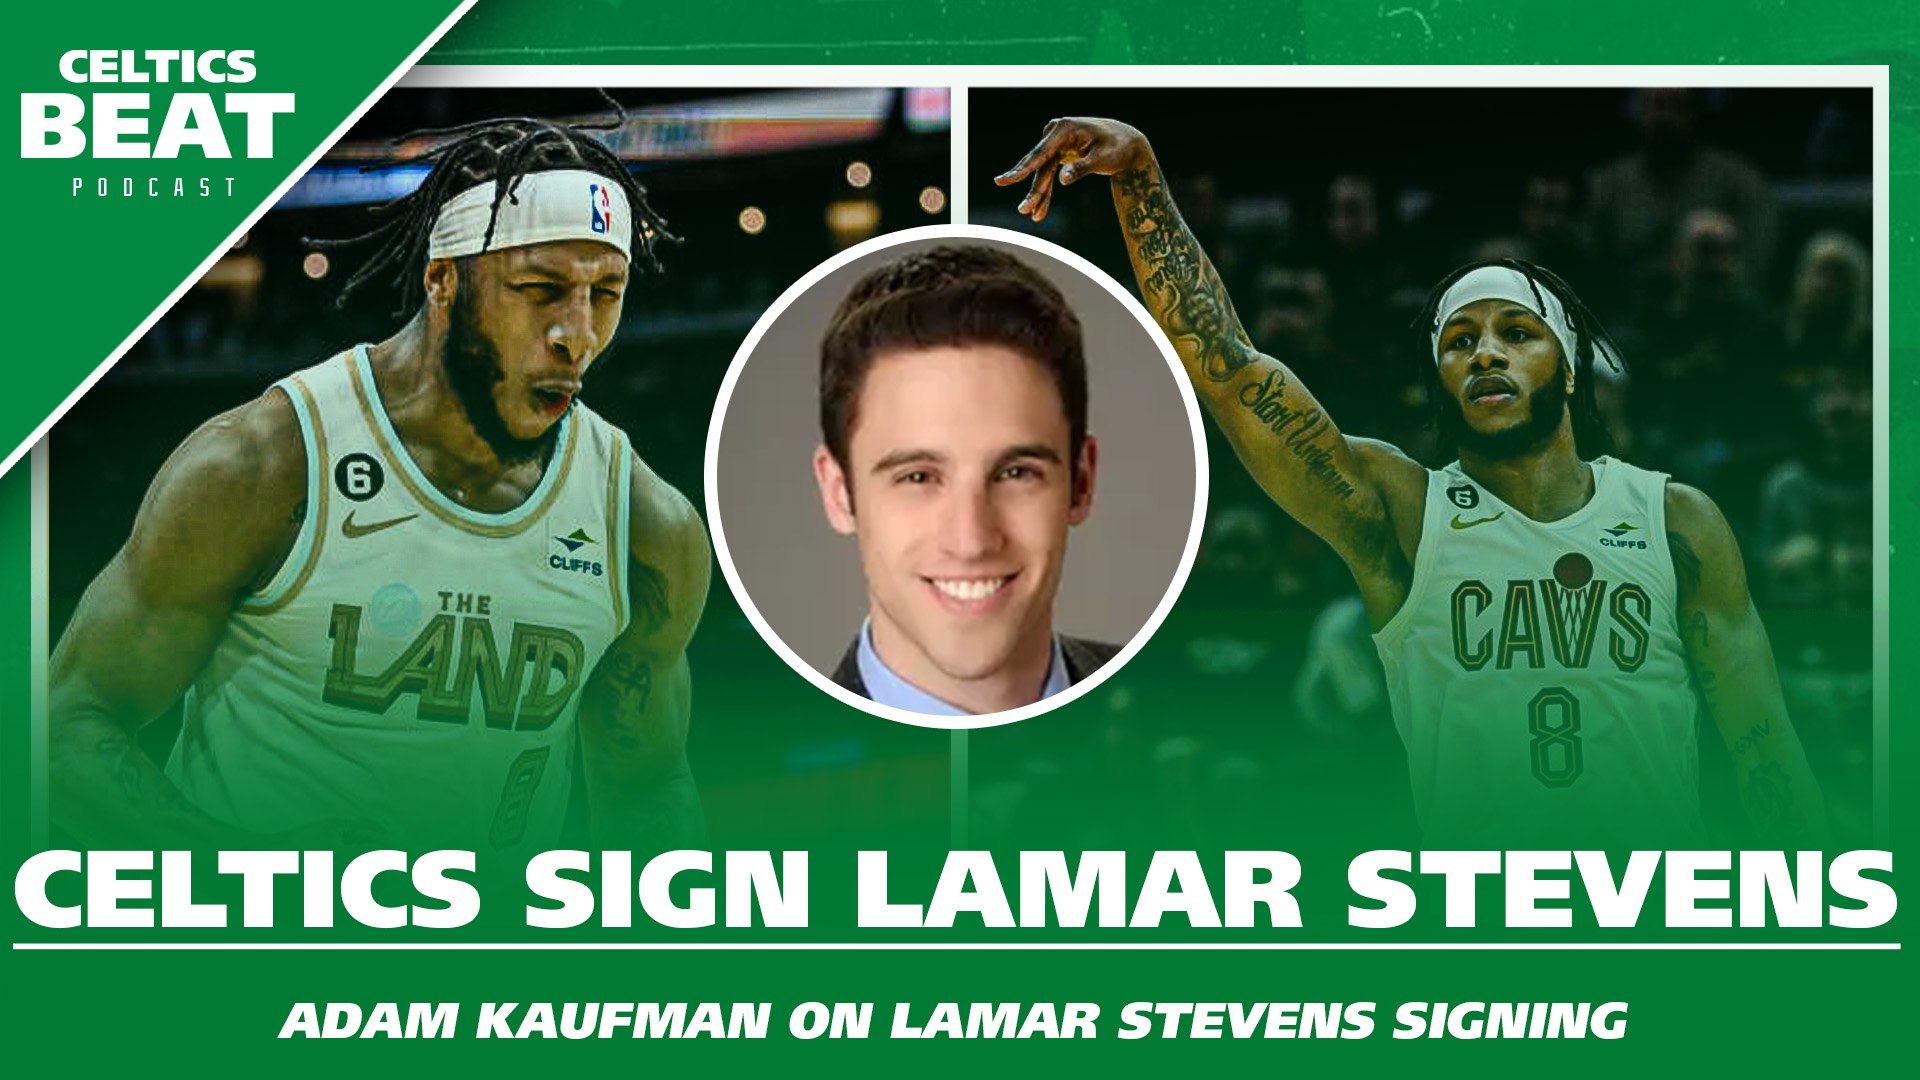 What Can Lamar Stevens Bring to the Celtics?